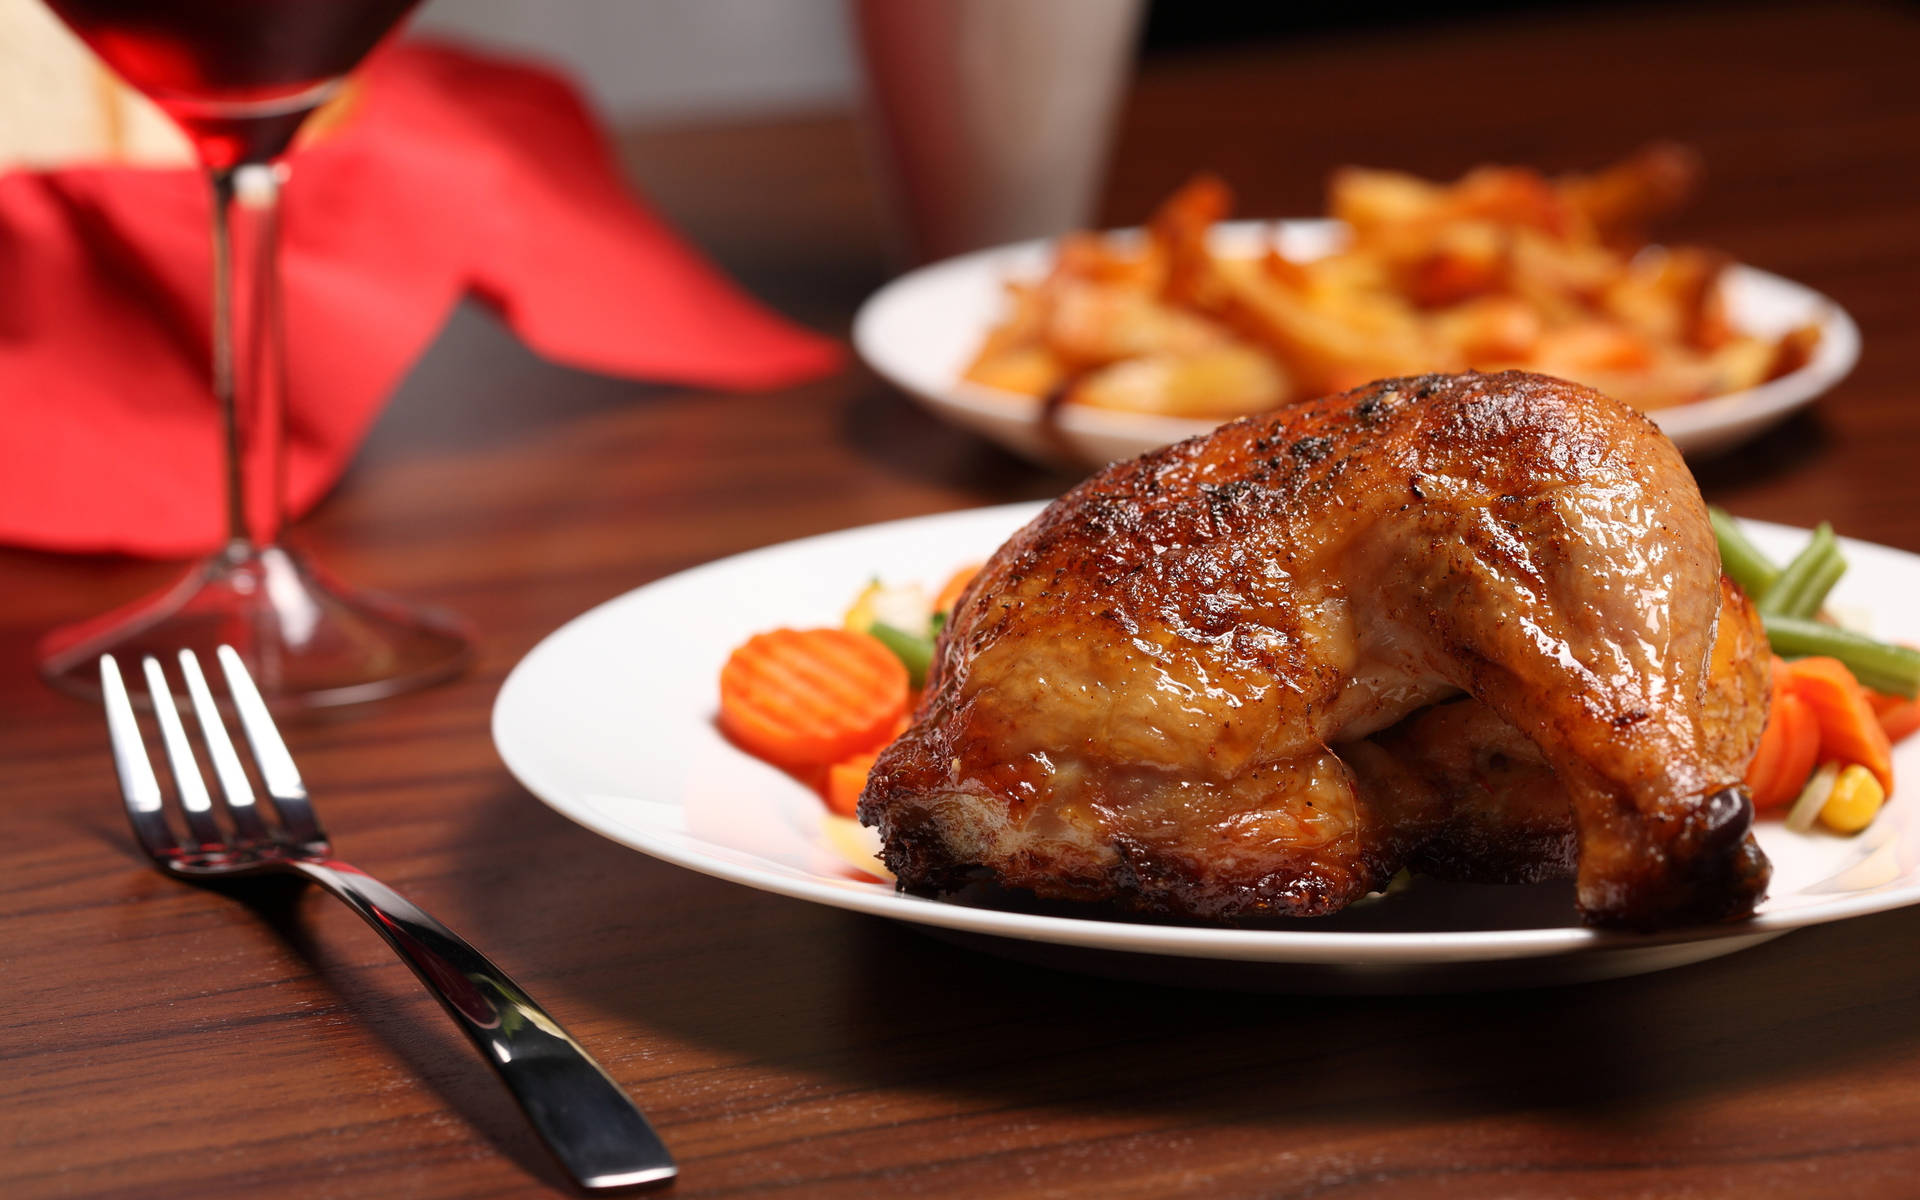 Juicy Roasted Chicken For Lunch Wallpaper